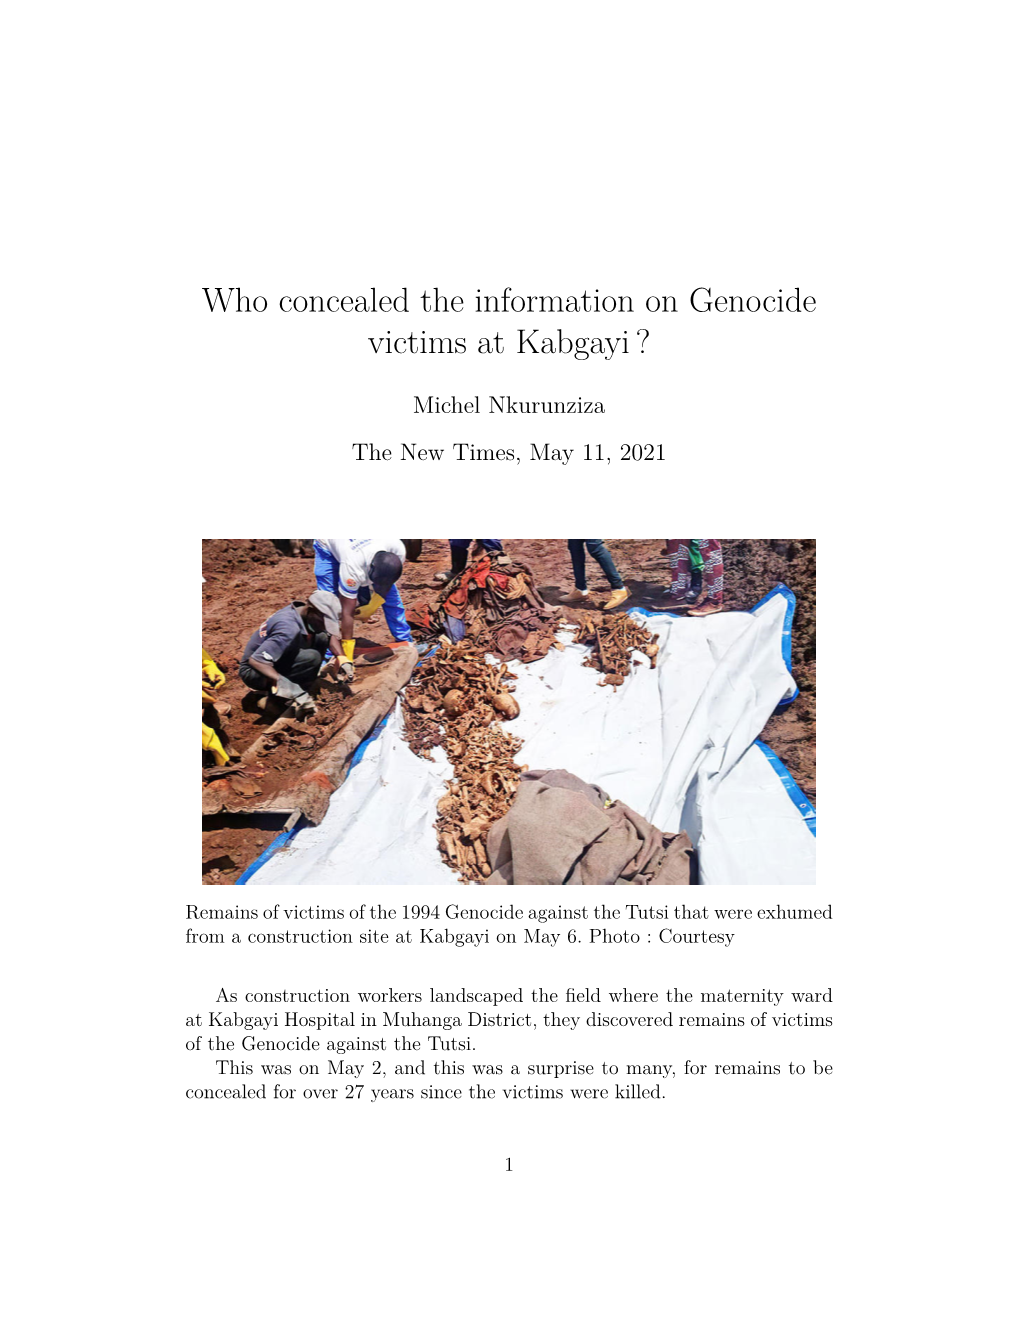 Who Concealed the Information on Genocide Victims at Kabgayi?